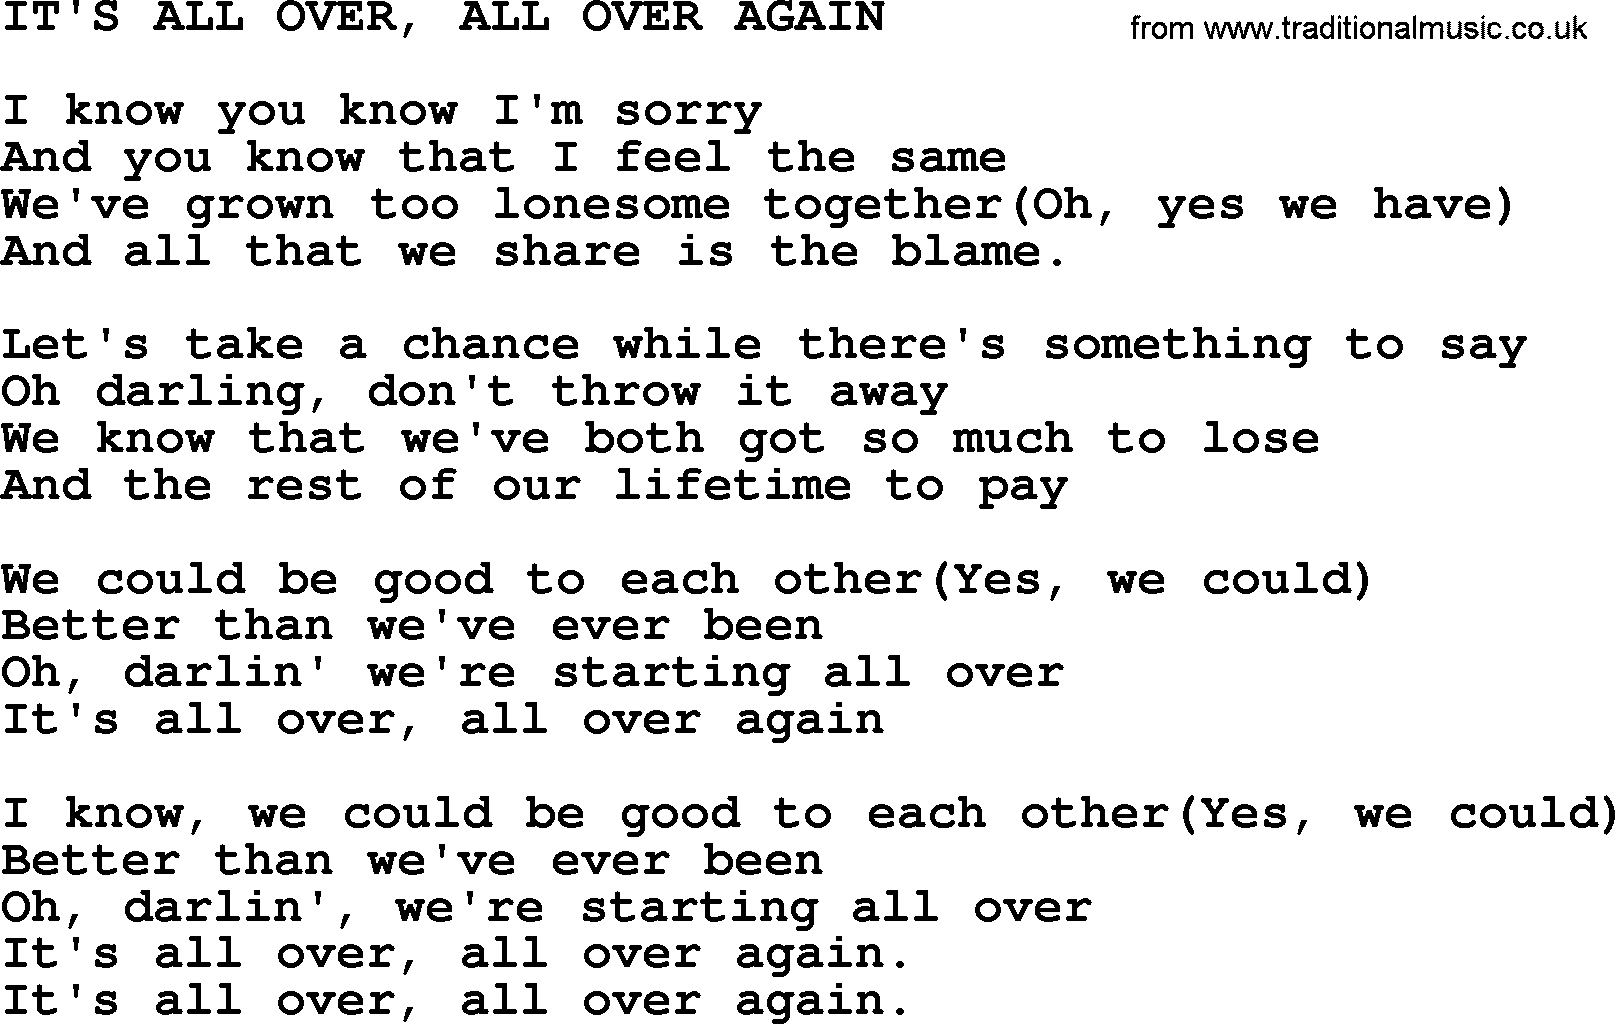 Kris Kristofferson song: It's All Over, All Over Again lyrics